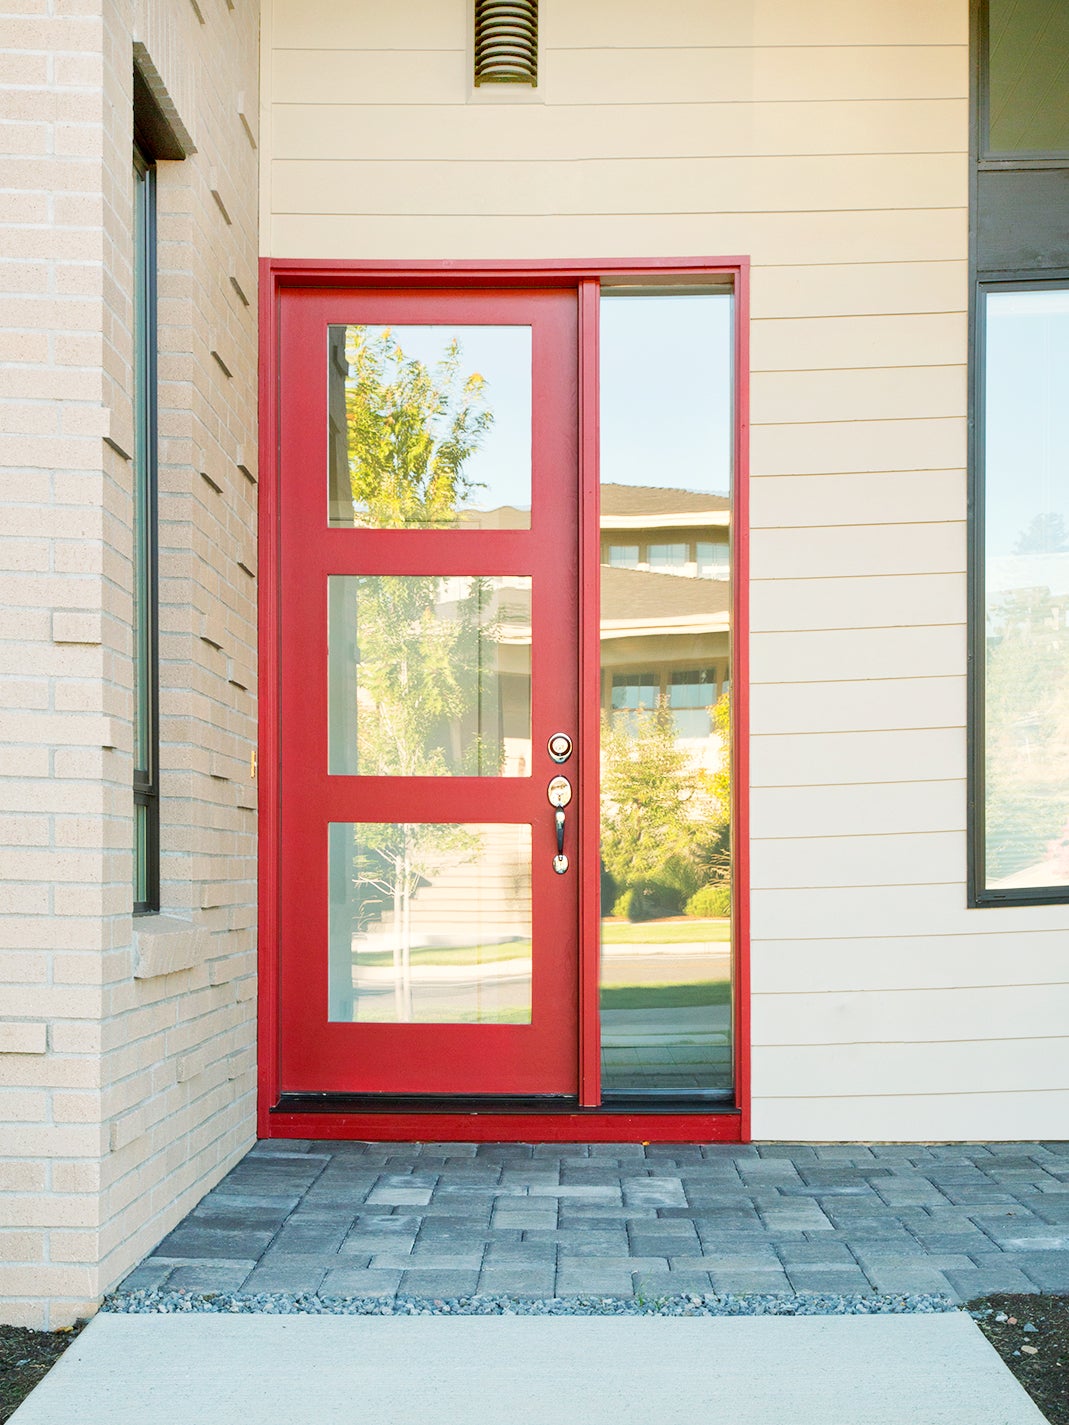 off-white exterior paint with red door